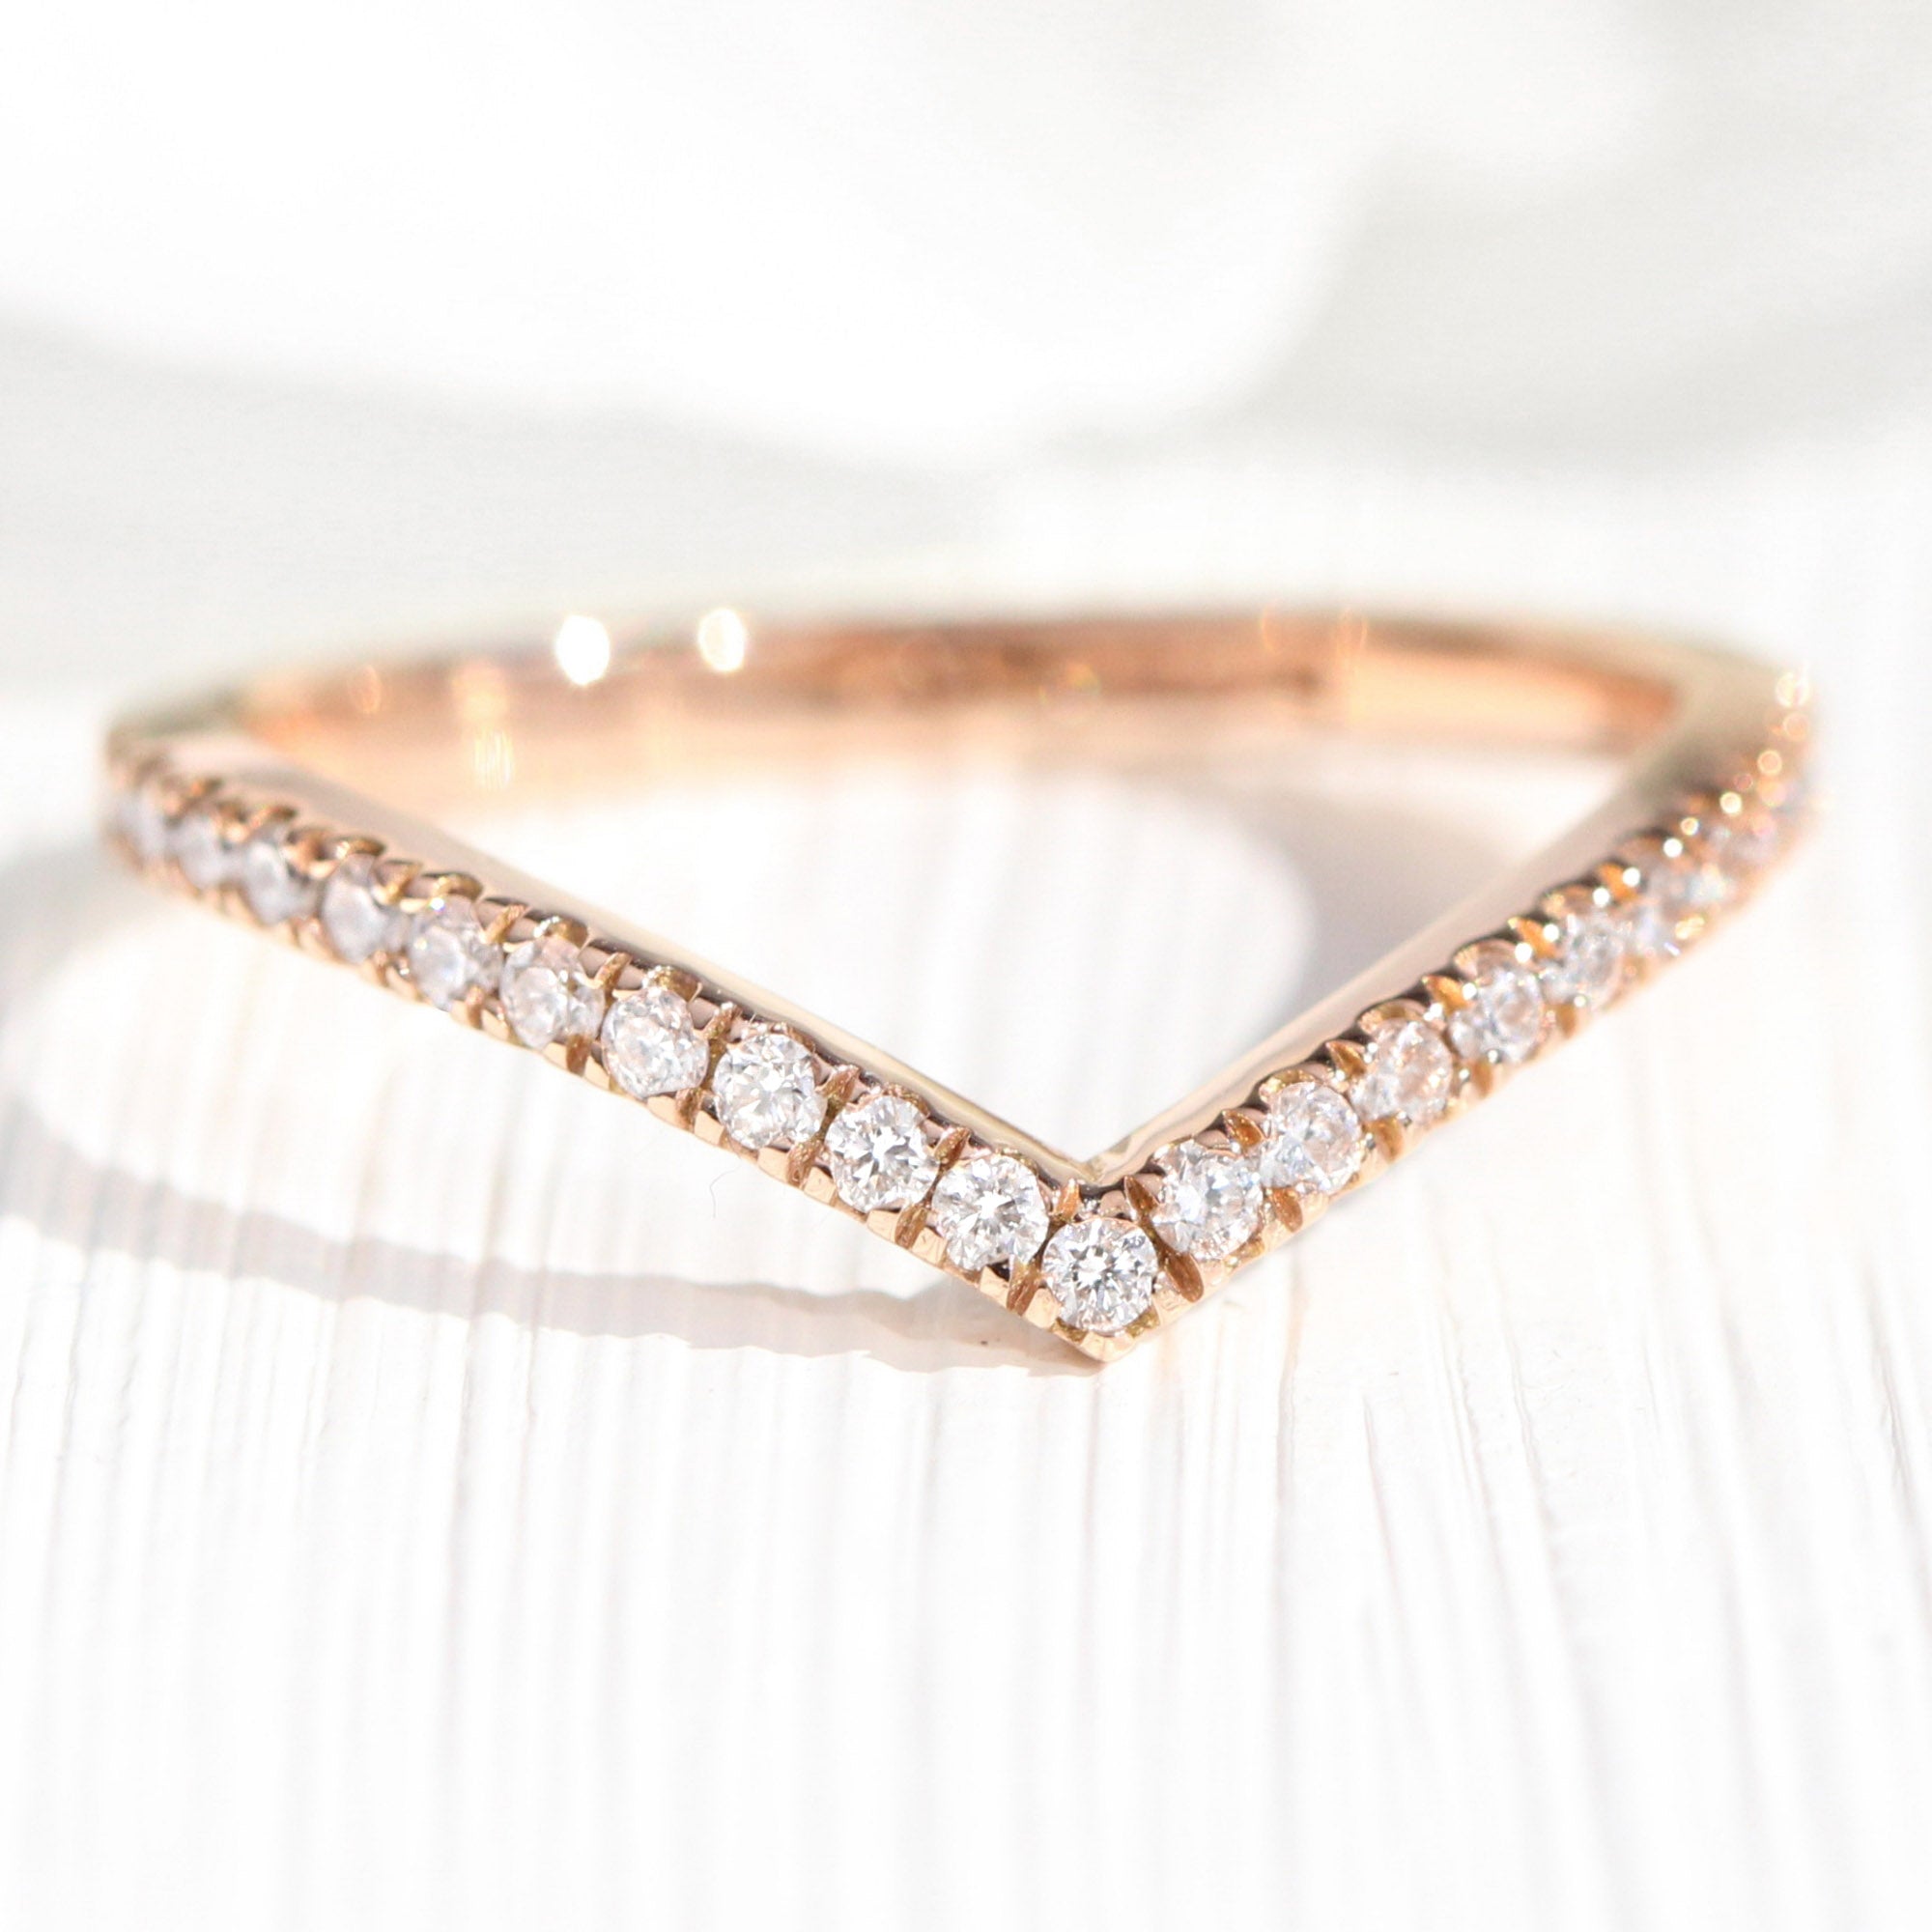 Chevron Diamond Wedding Ring Rose Gold V Shaped Curved Pave Band La More Design Jewelry